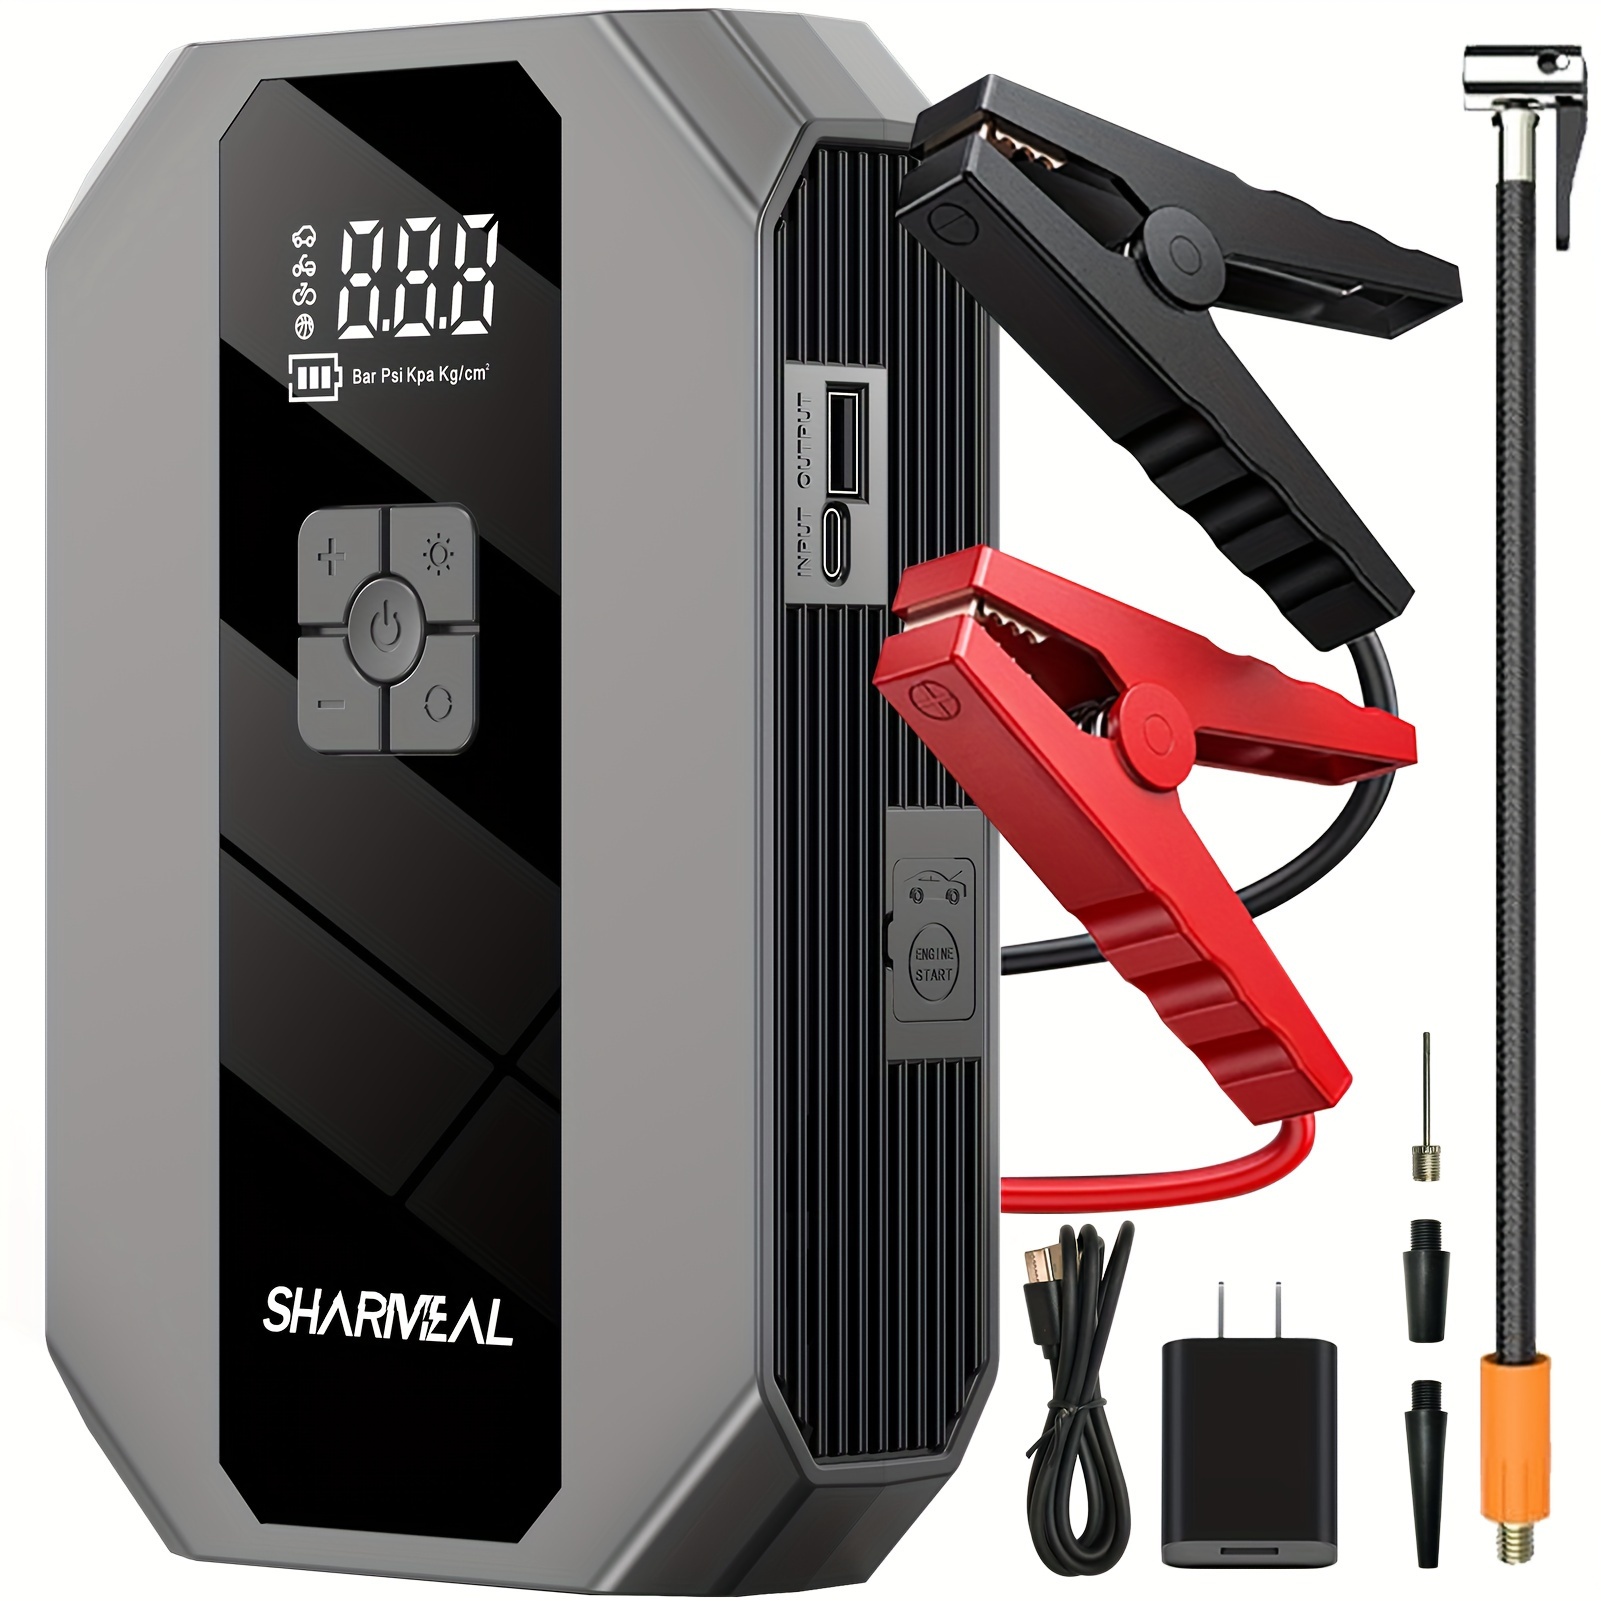 

Sharmeal 4500a Jump Starter With Air Compressor, 12v Battery Jump Starter With 150psi Digital Tire Inflator, Up To 9l Gas & 7l Engines, Car Jumper Box With Large Display, Emergency Light